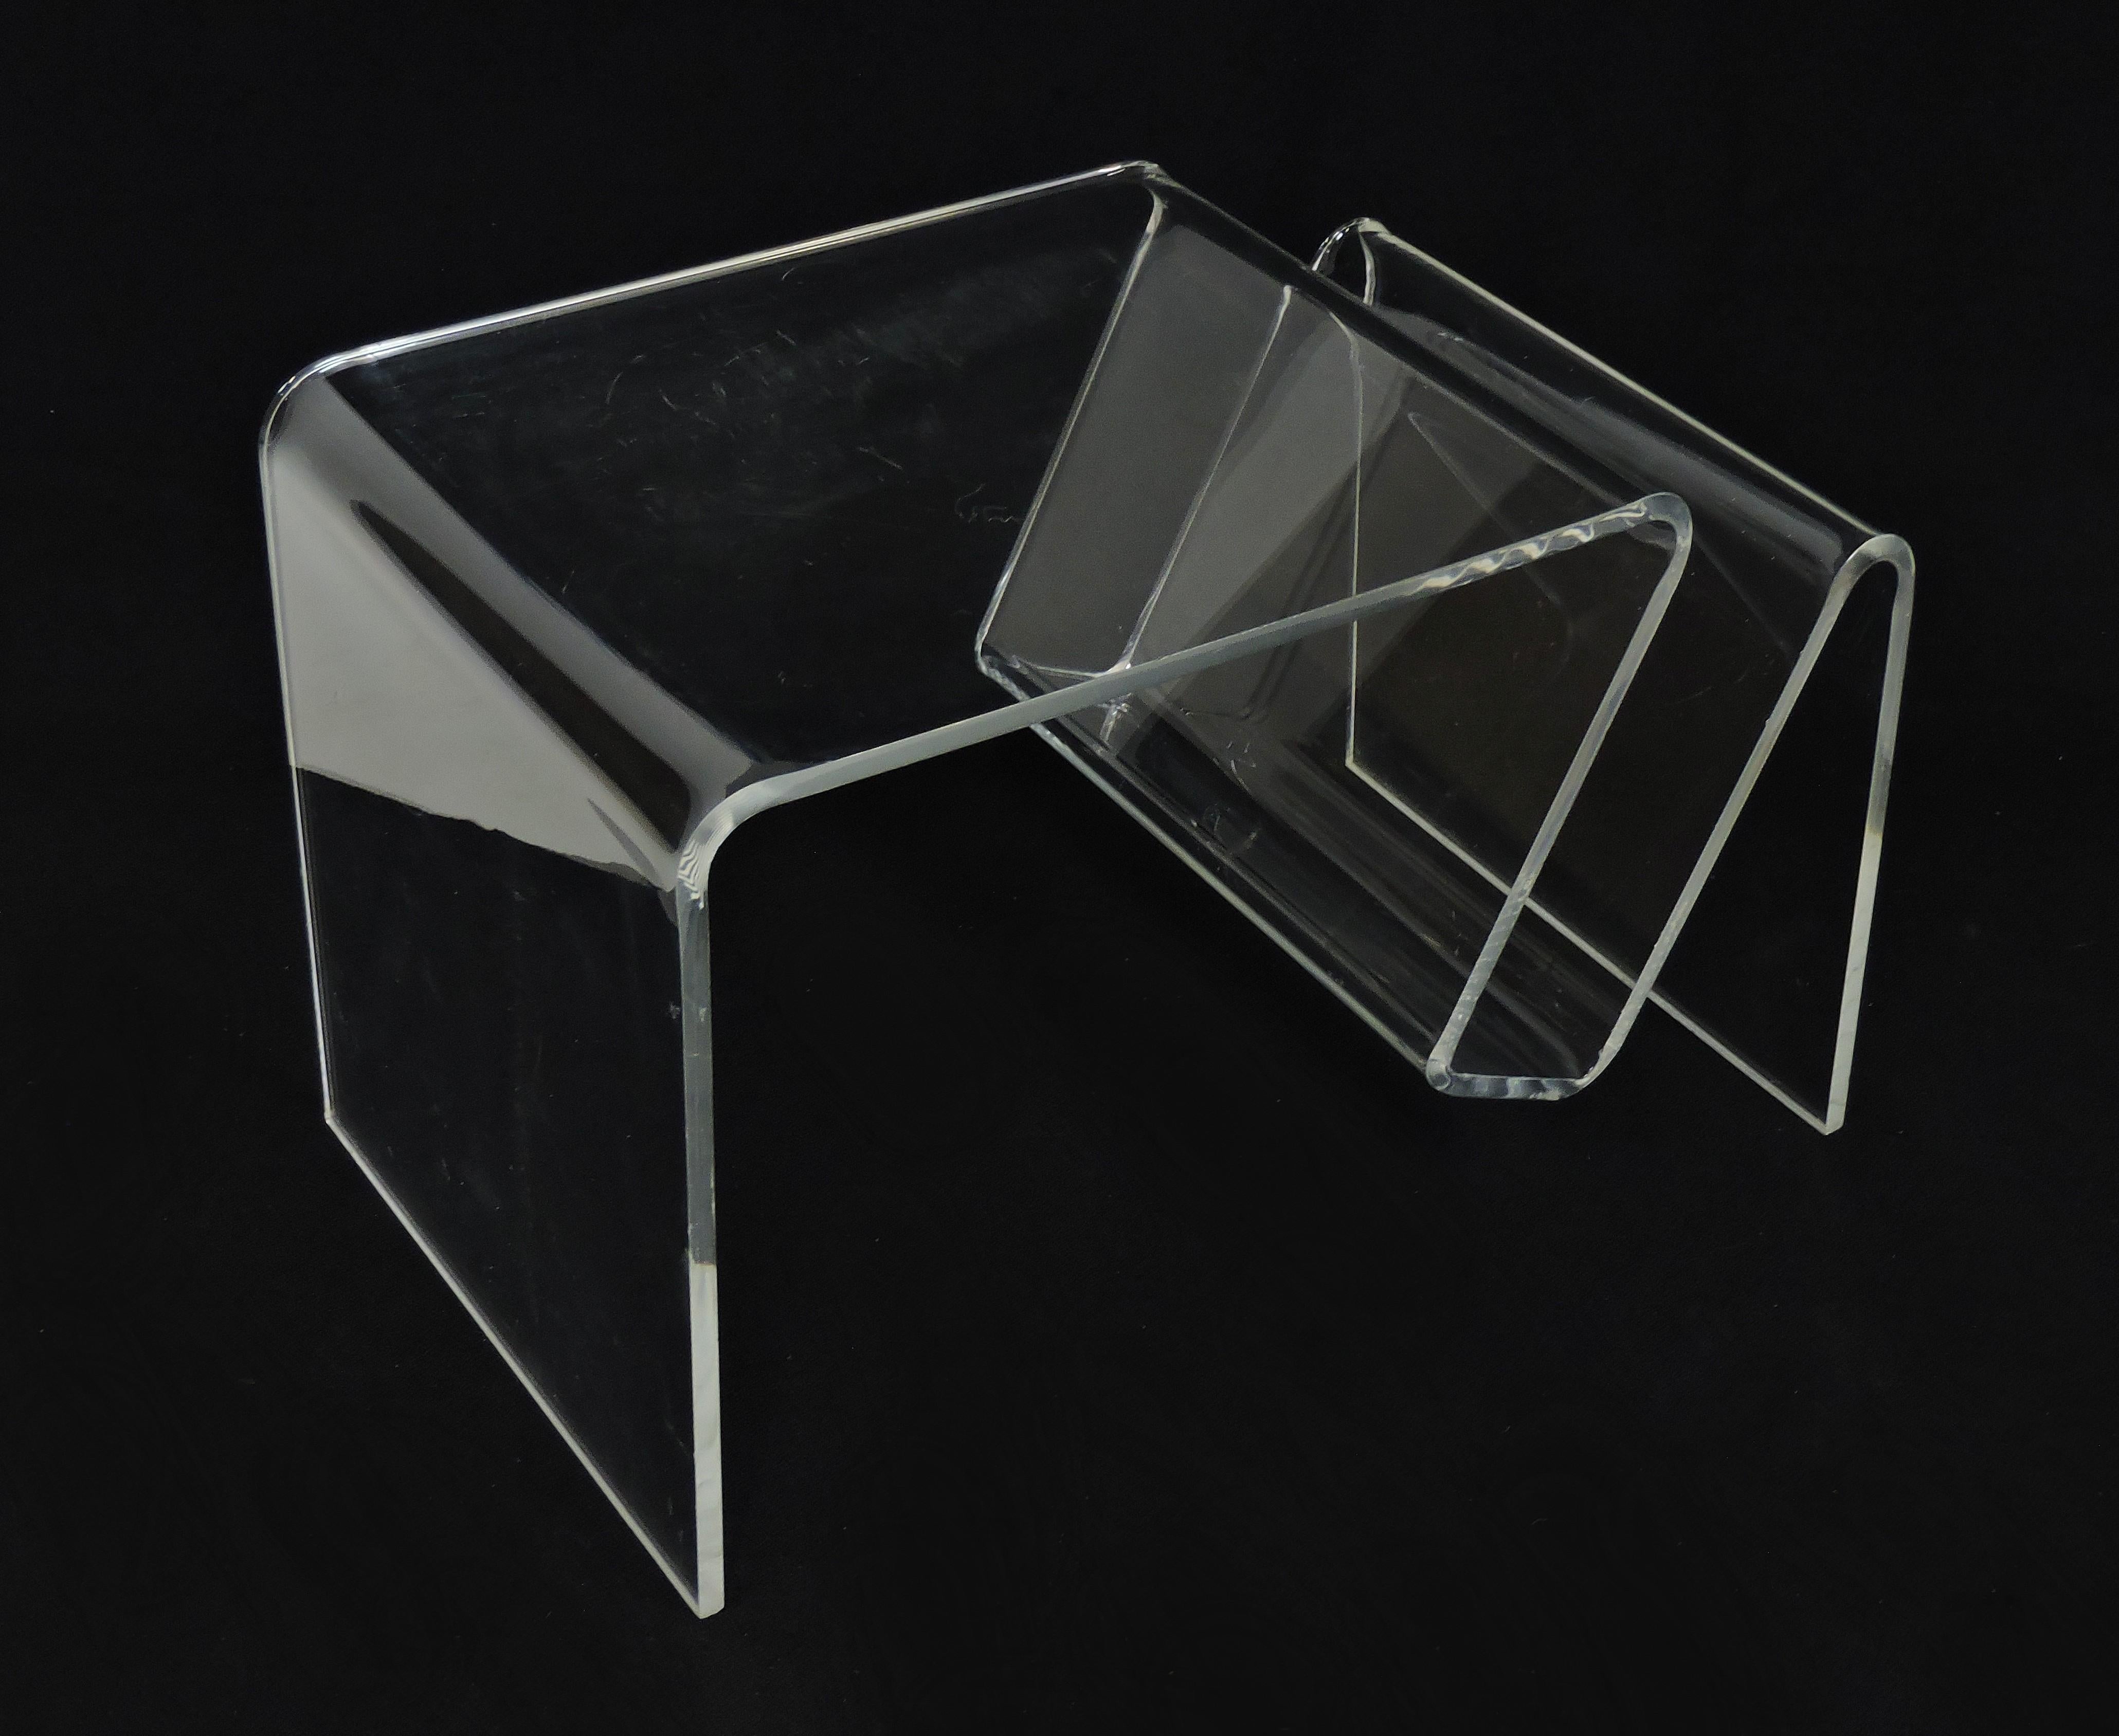 Late 20th Century Mid-Century Modern Lucite End Table Magazine Rack or Holder, Neal Small Style